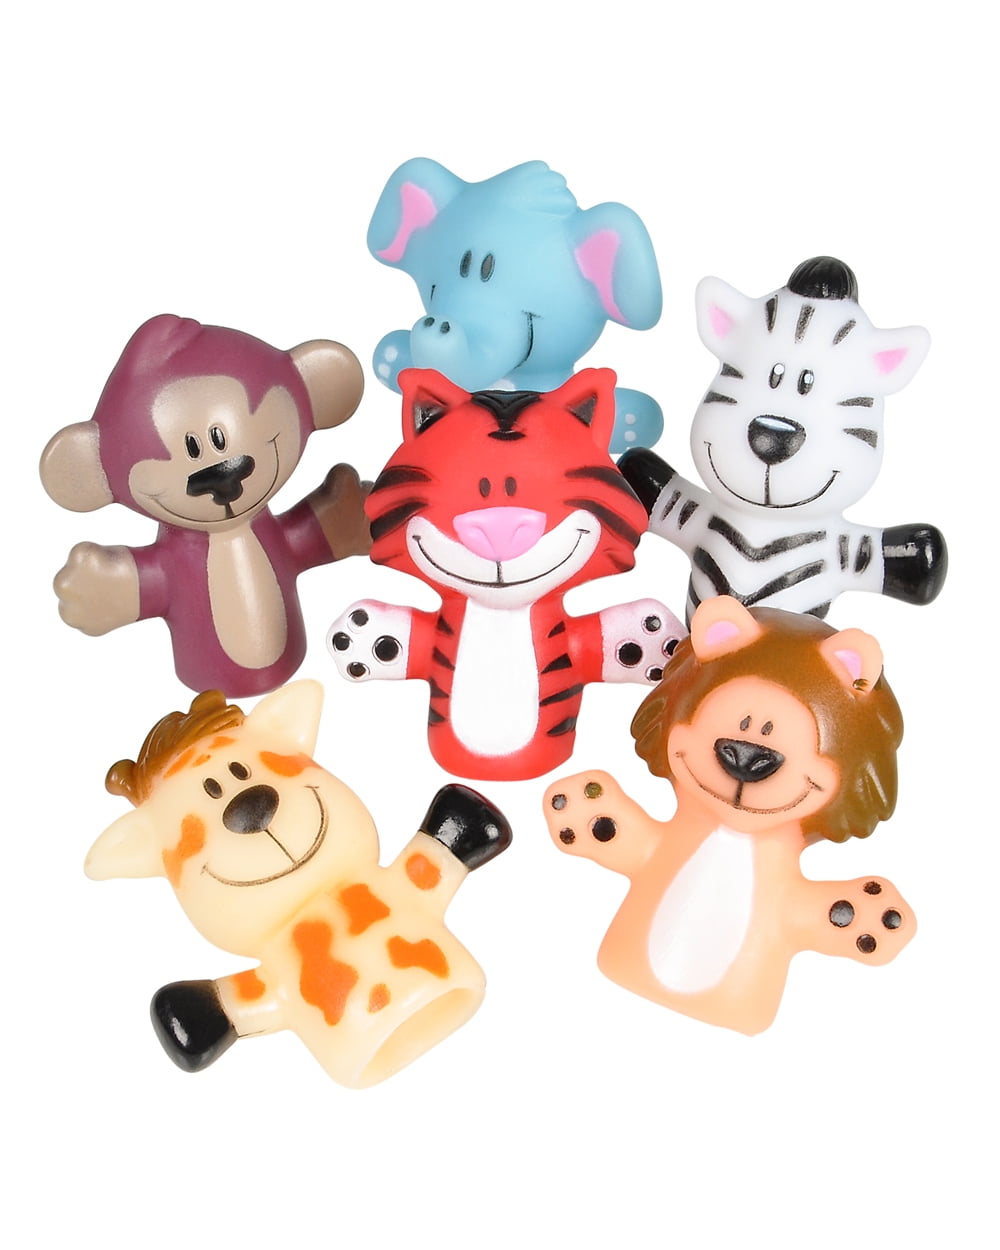 NUOBESTY 20pcs Animal Friends Hand Puppets Cartoon Plush Finger Puppets for Interactive Playset Birthday Party Favor Supplies